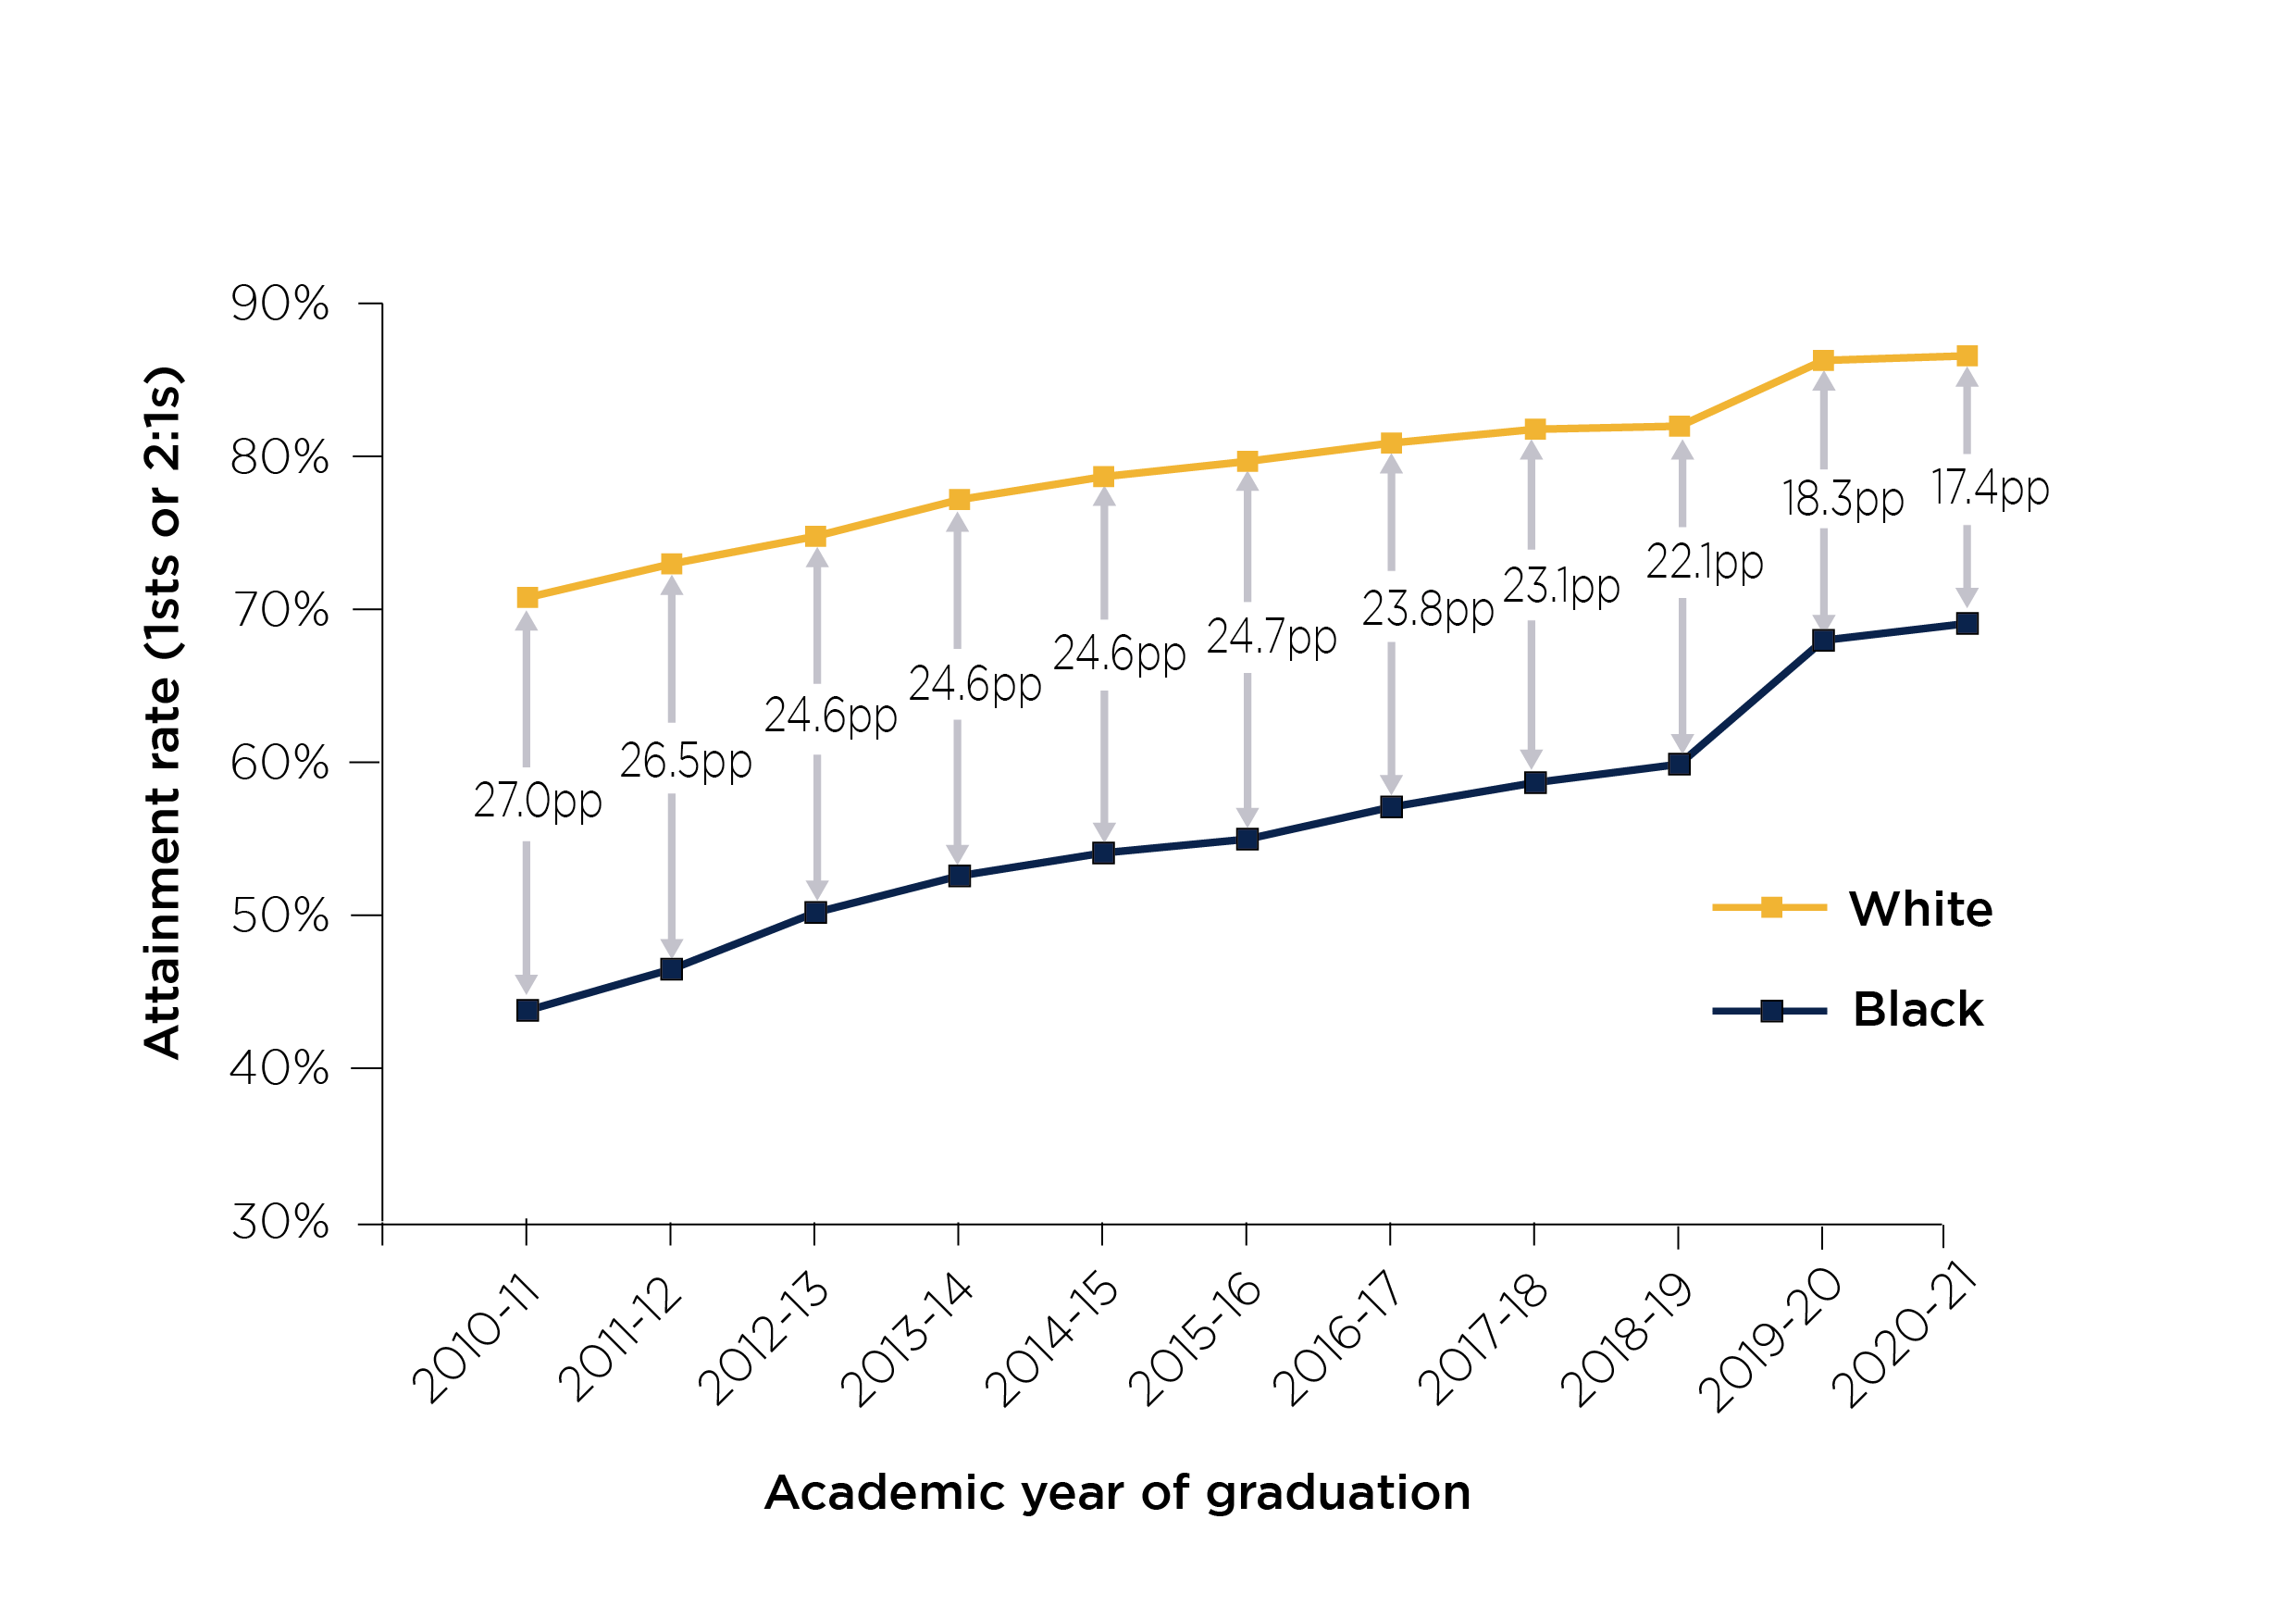 Figure 2: Gap in degree outcomes (1sts or 2:1s) between white and black students